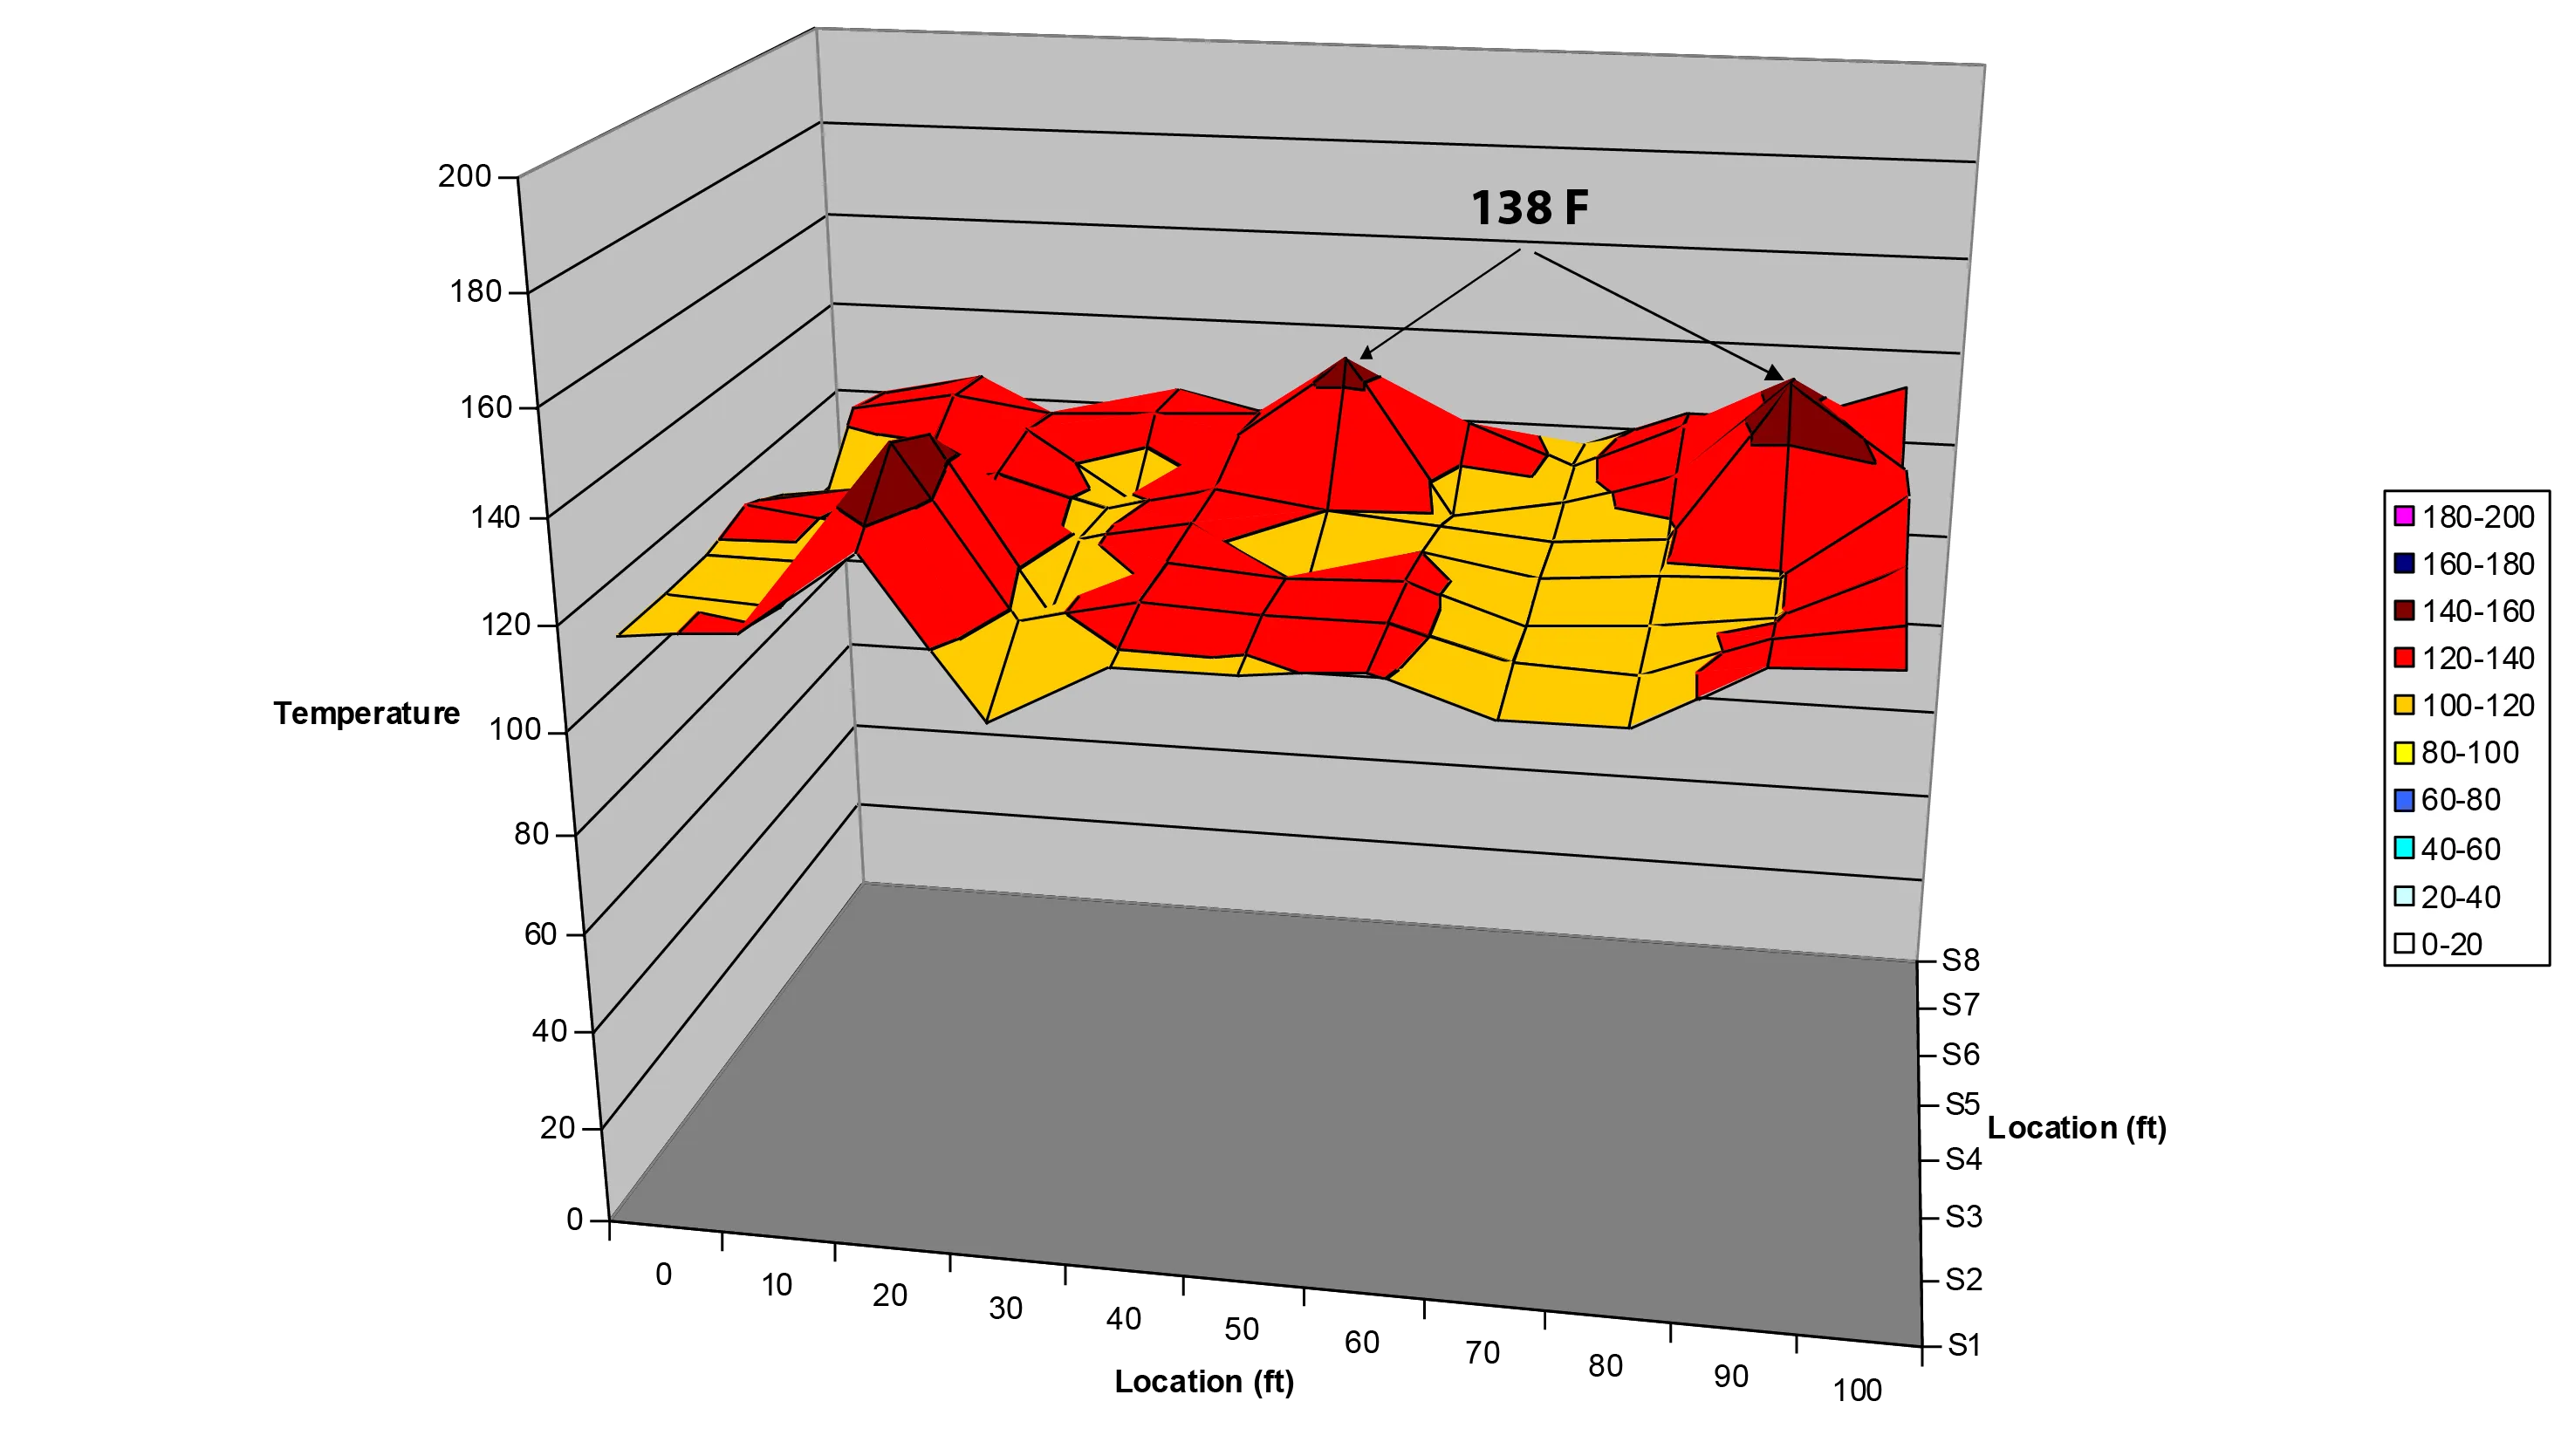 Thermal Map of the Roof Surface Temperature Before the Application of ECRS